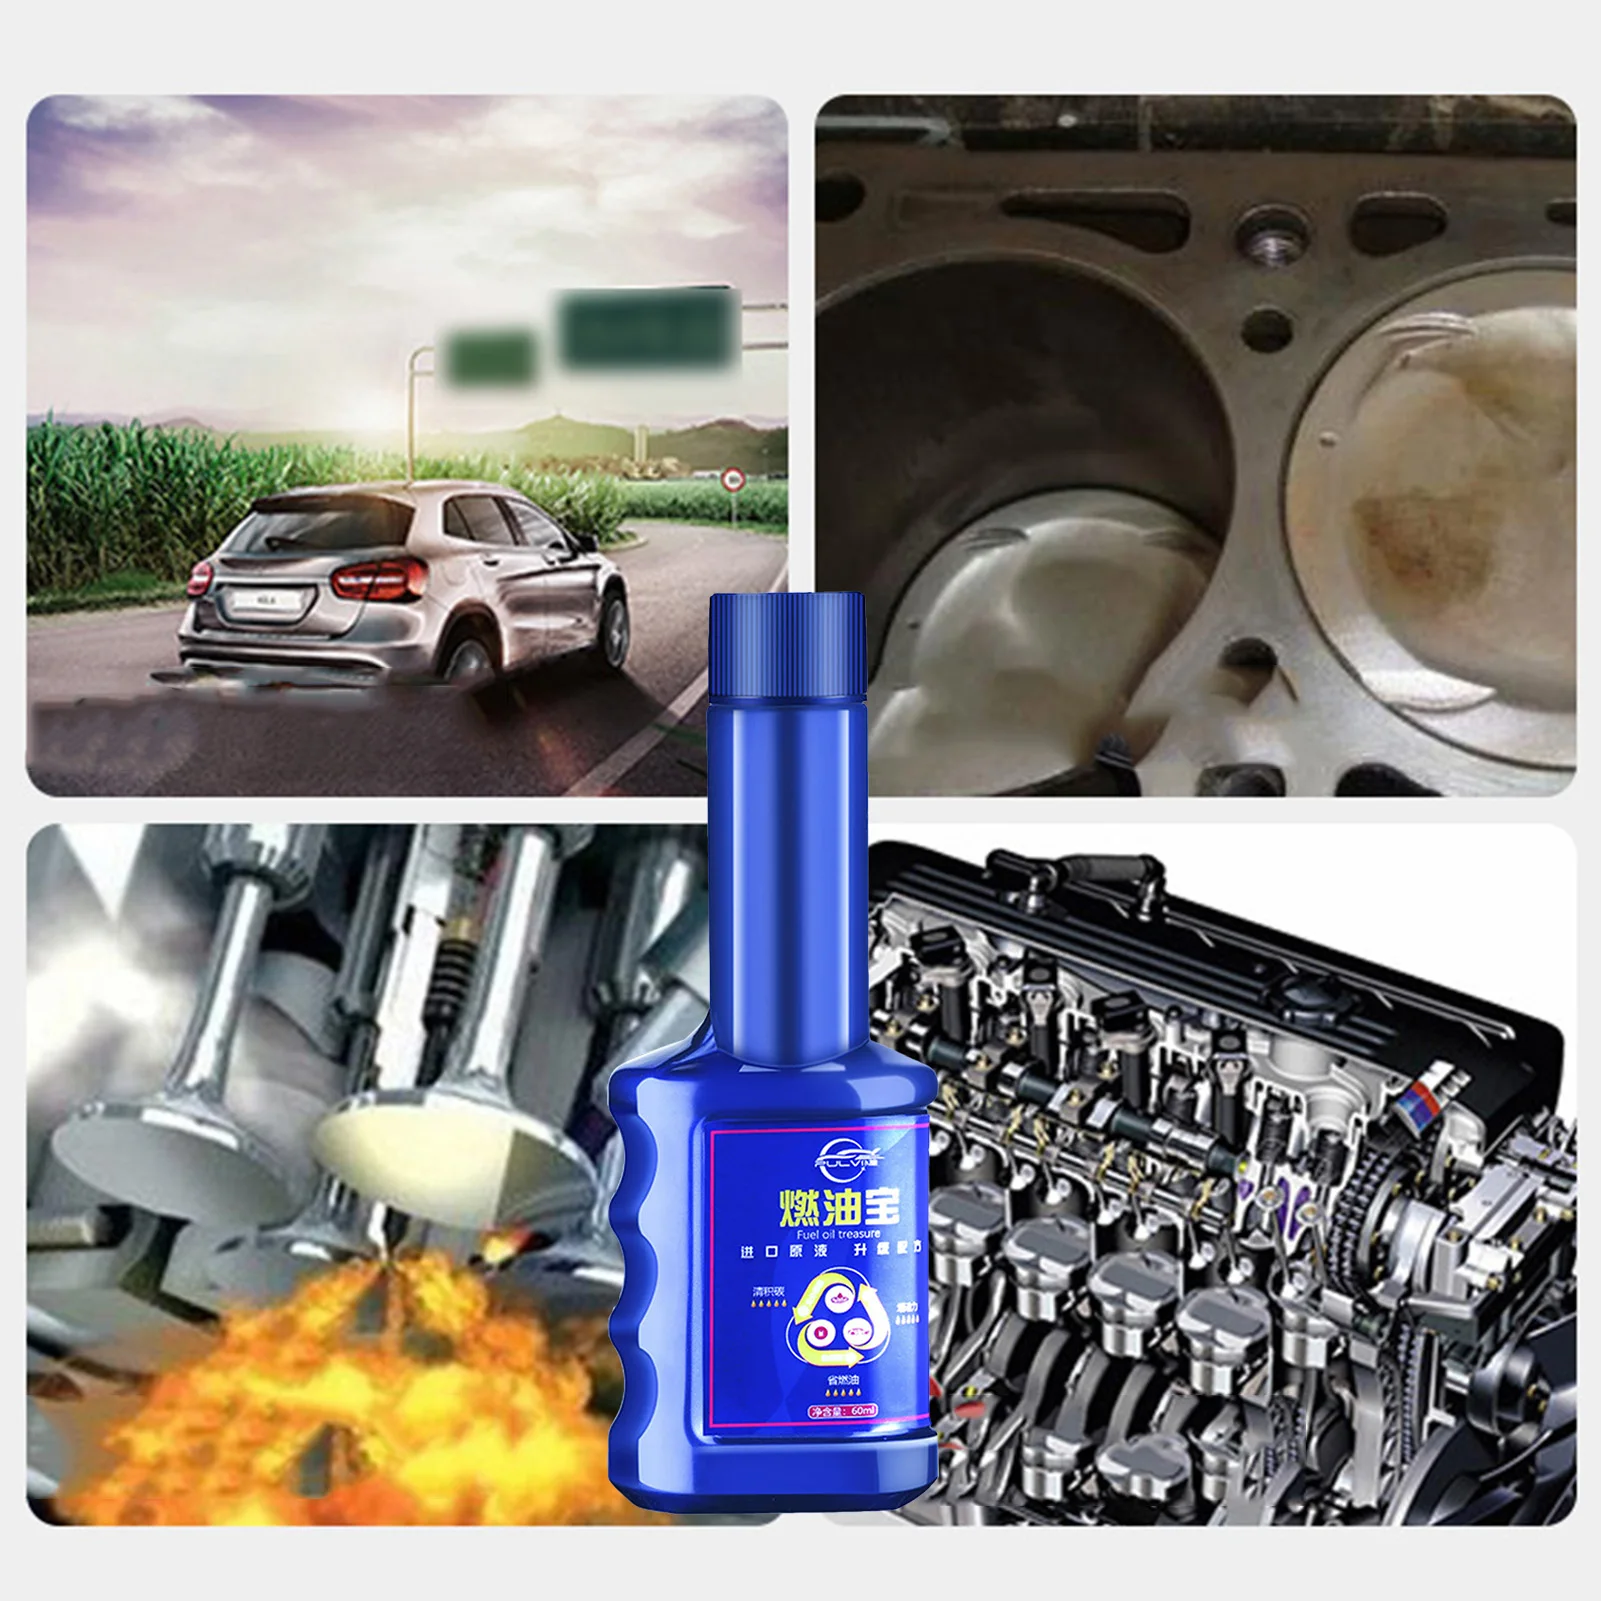 

1/2PC Car Fuel Treasure 60ml Gaso line Additive Remove Engine Carbon Deposit Save G asoline Increase Power In Oil For Fuel Saver